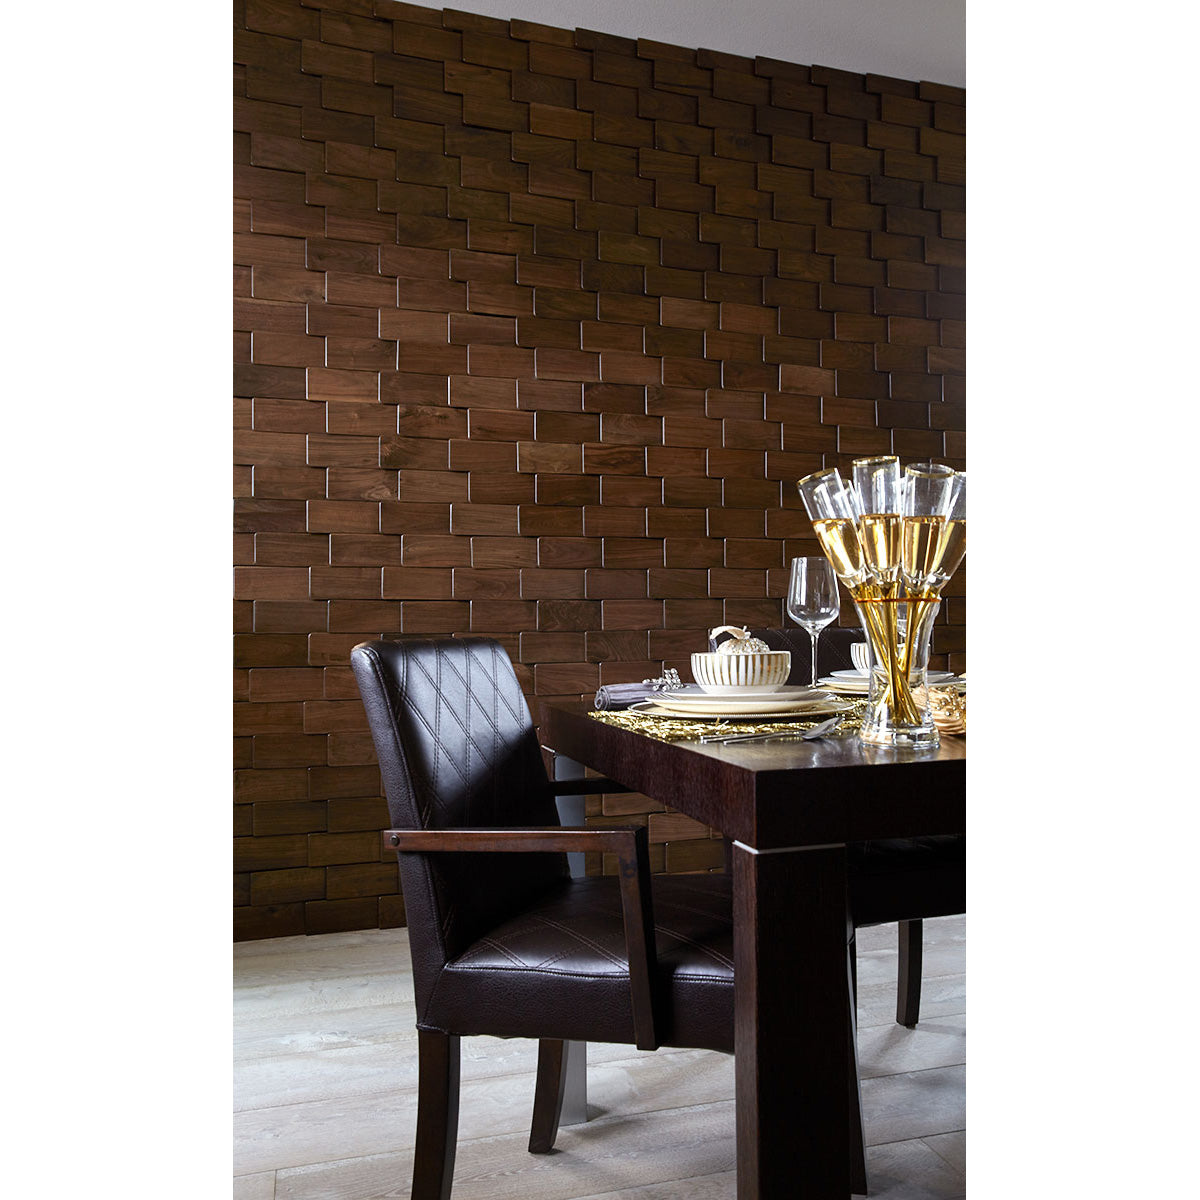 DuChateau - Scale Reckt Wall Coverings - Stout